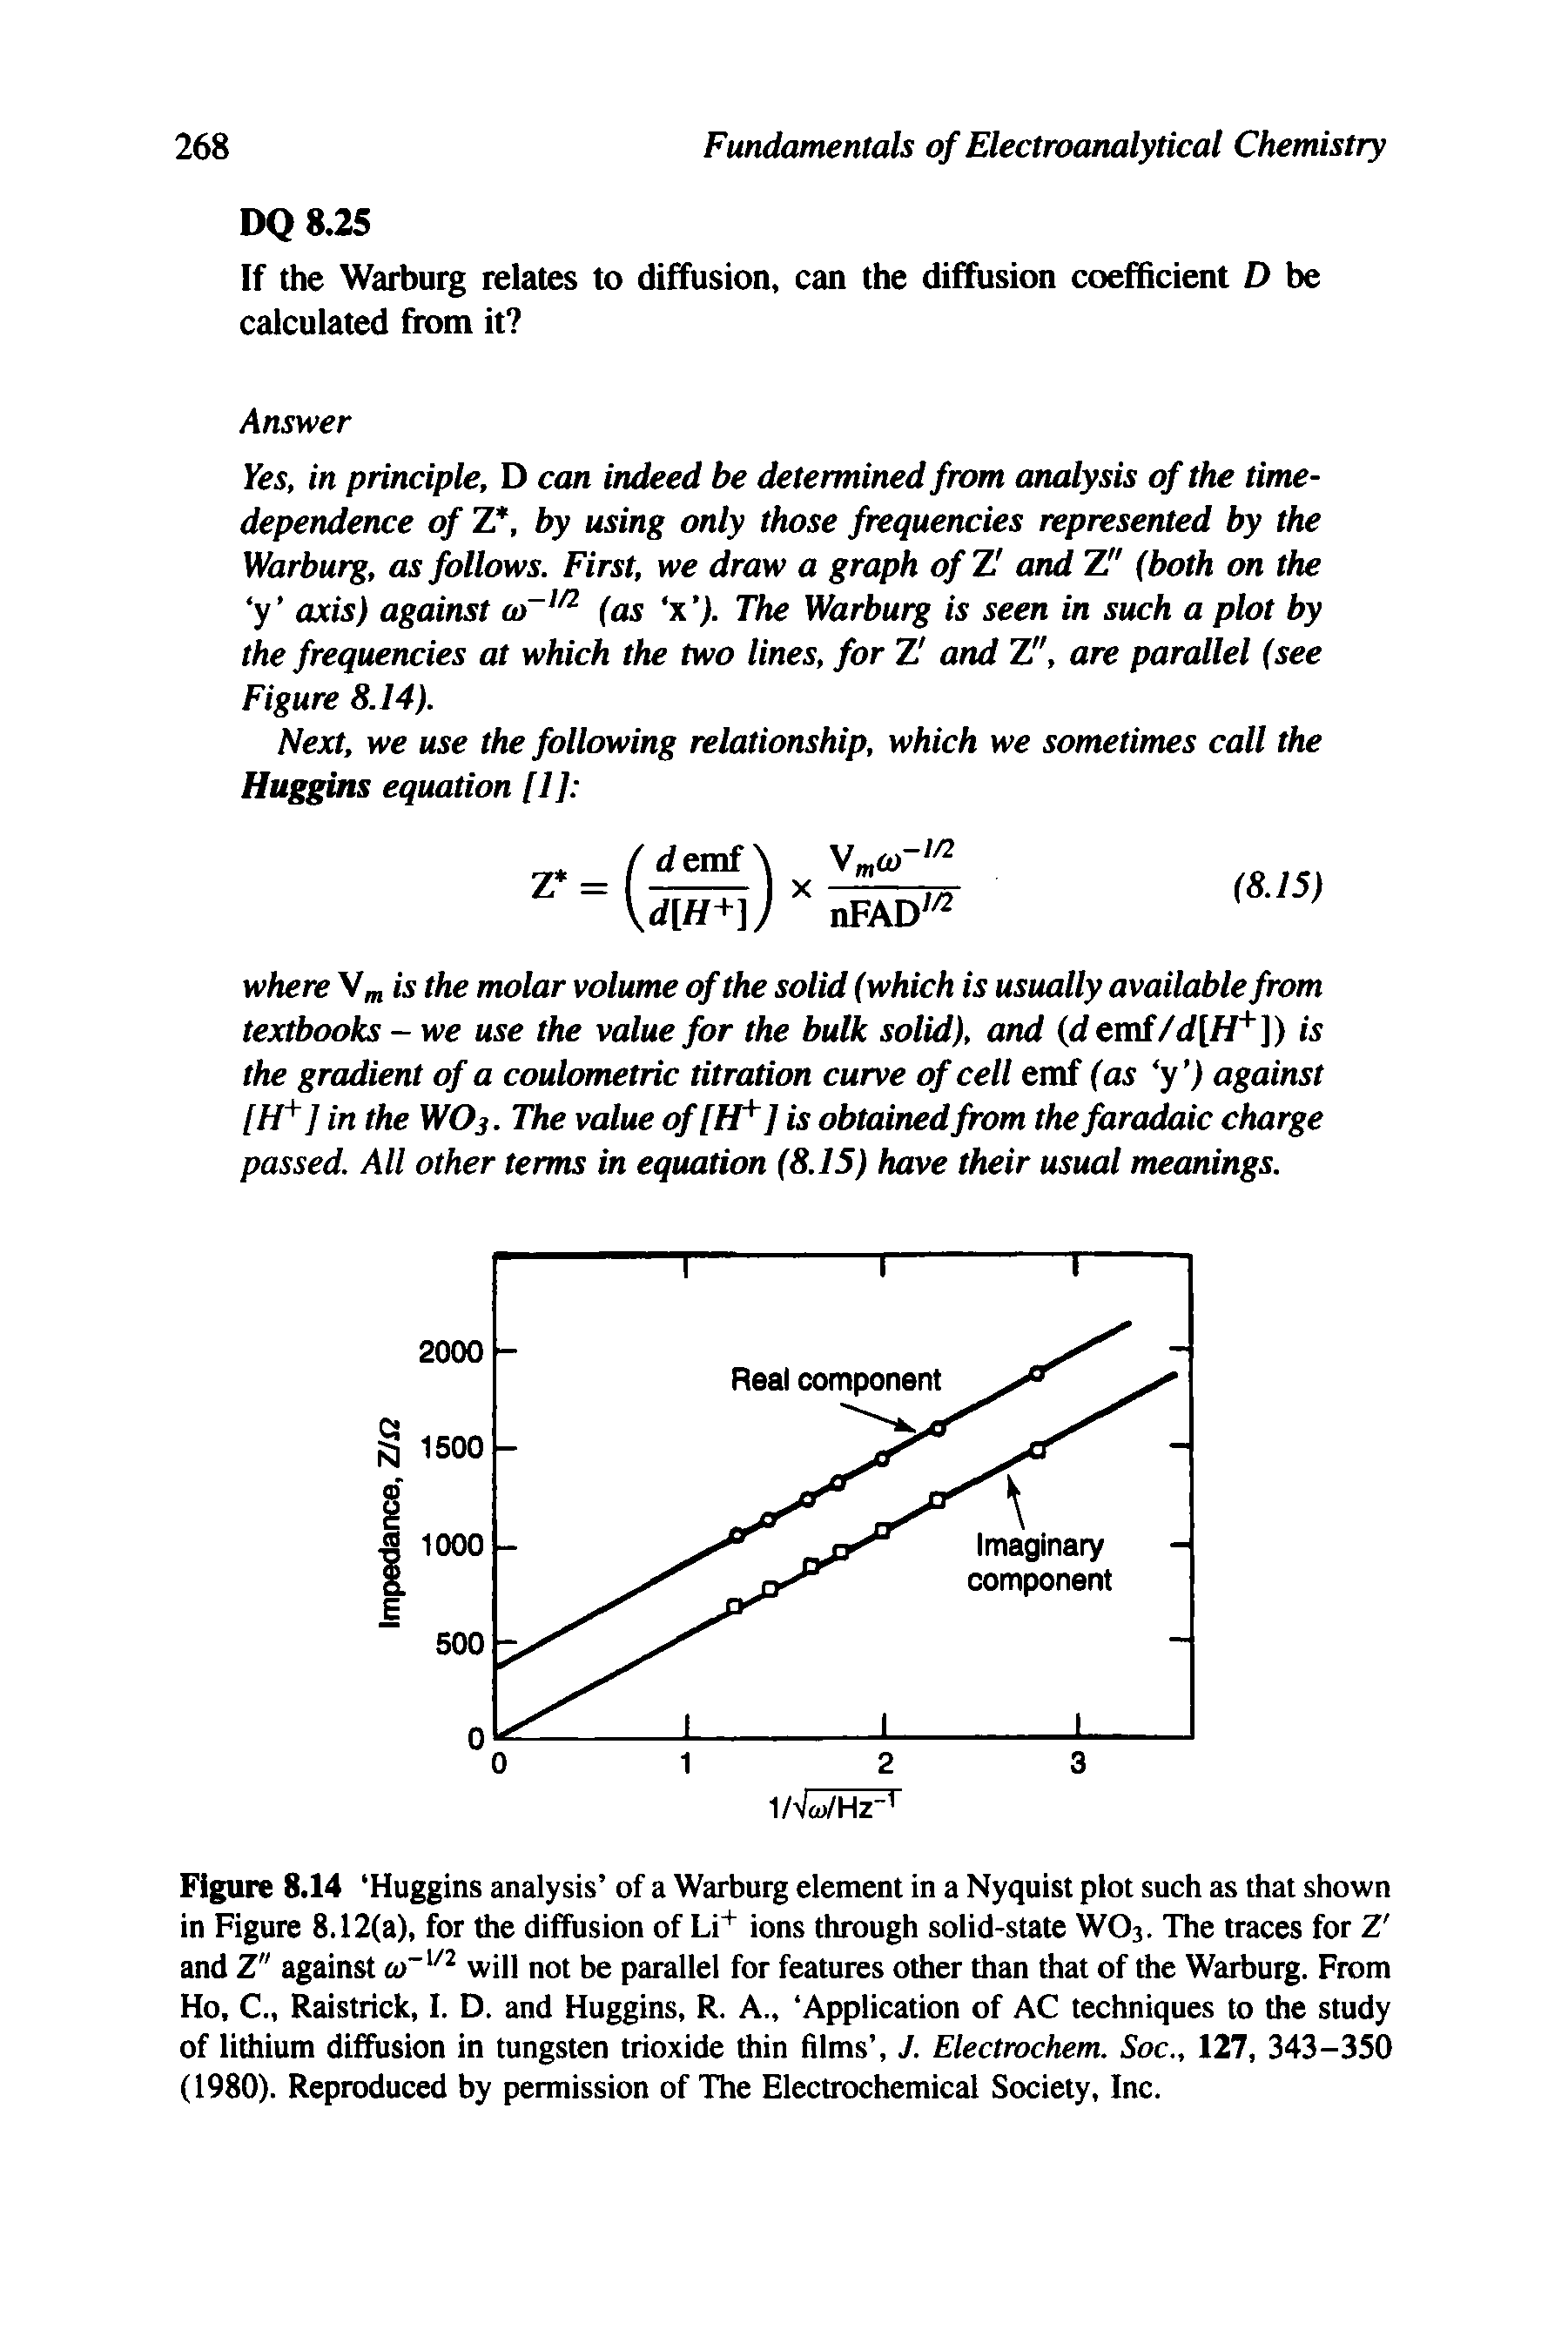 Figure 8.14 Huggins analysis of a Warburg element in a Nyquist plot such as that shown in Figure 8.12(a), for the diffusion of Li" ions through solid-state WO3. The traces for Z and Z" against will not be parallel for features other than that of the Warburg. From Ho, C., Raistrick, I. D. and Huggins, R. A., Application of AC techniques to the study of lithium diffusion in tungsten trioxide thin films , J. Electrochem. Soc., 127, 343-350 (1980). Reproduced by permission of The Electrochemical Society, Inc.